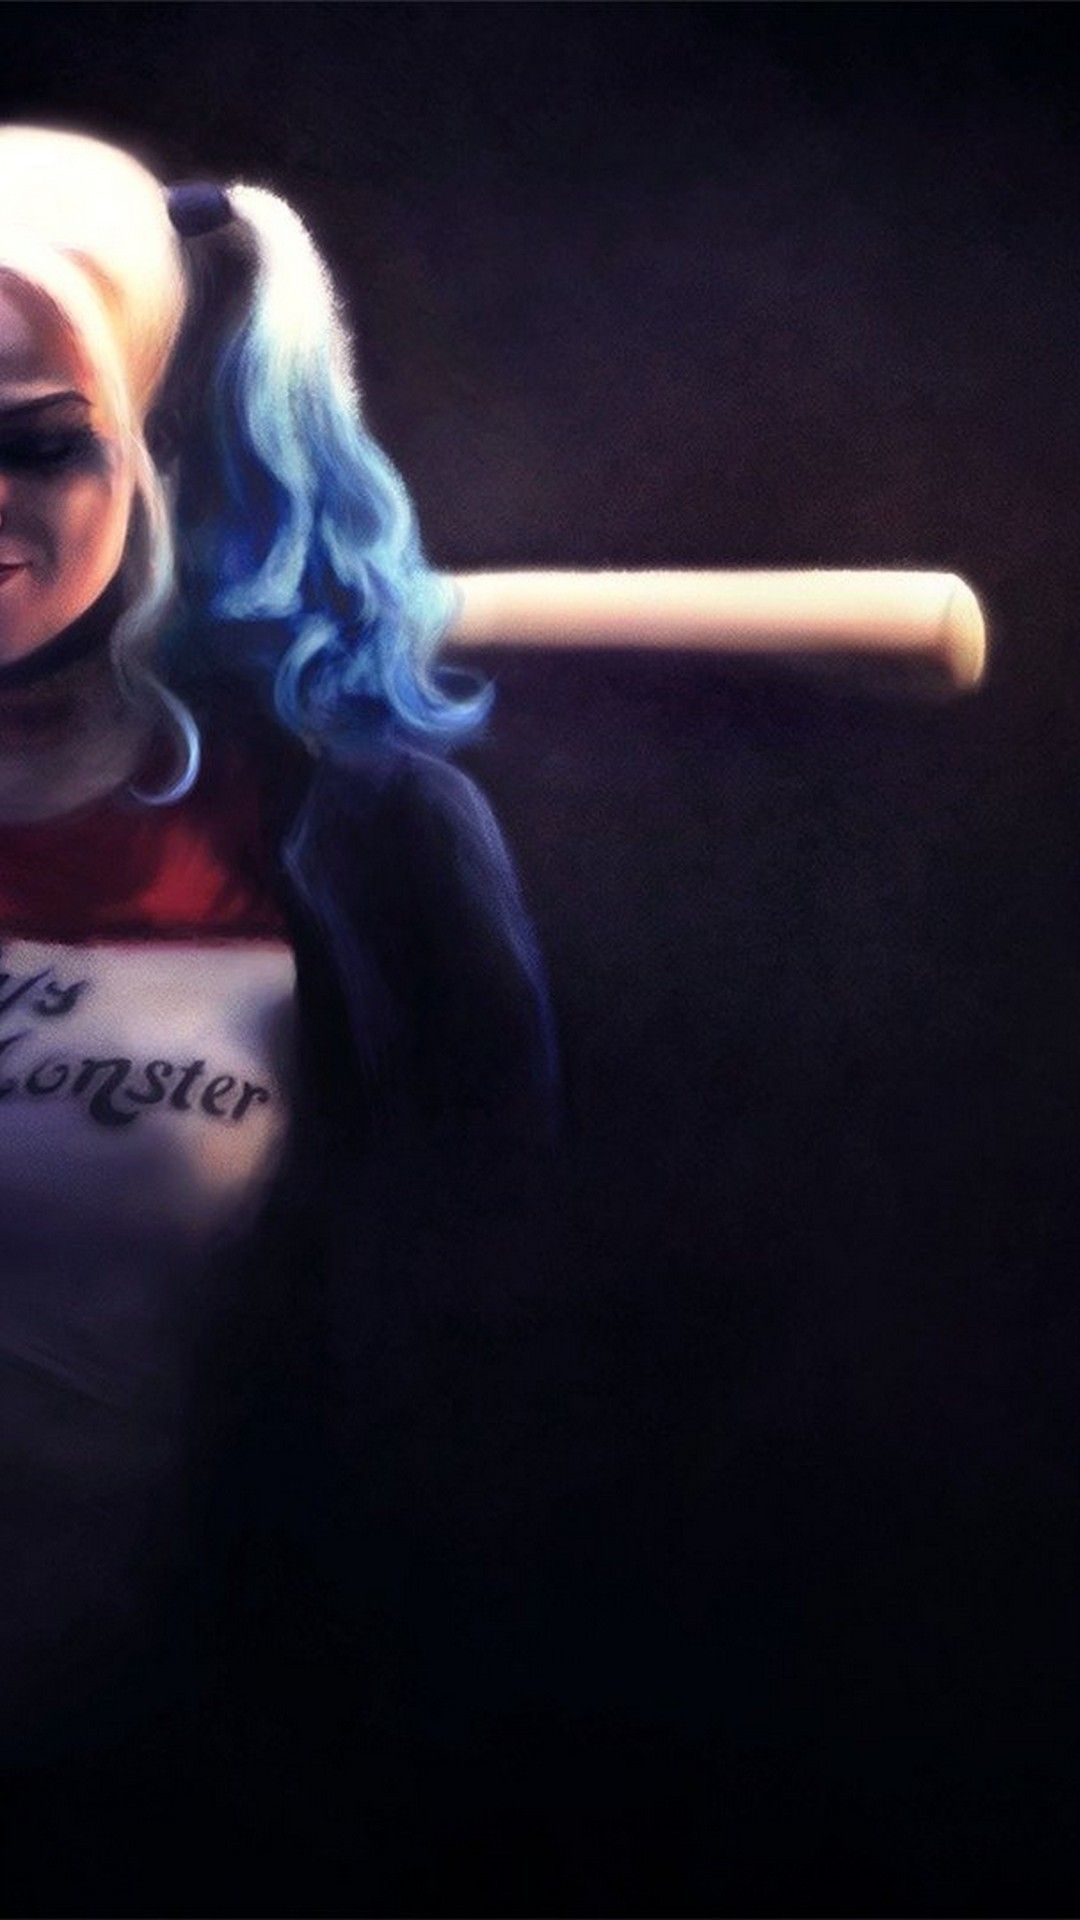 iPhone Wallpaper Picture Of Harley Quinn 3D iPhone Wallpaper